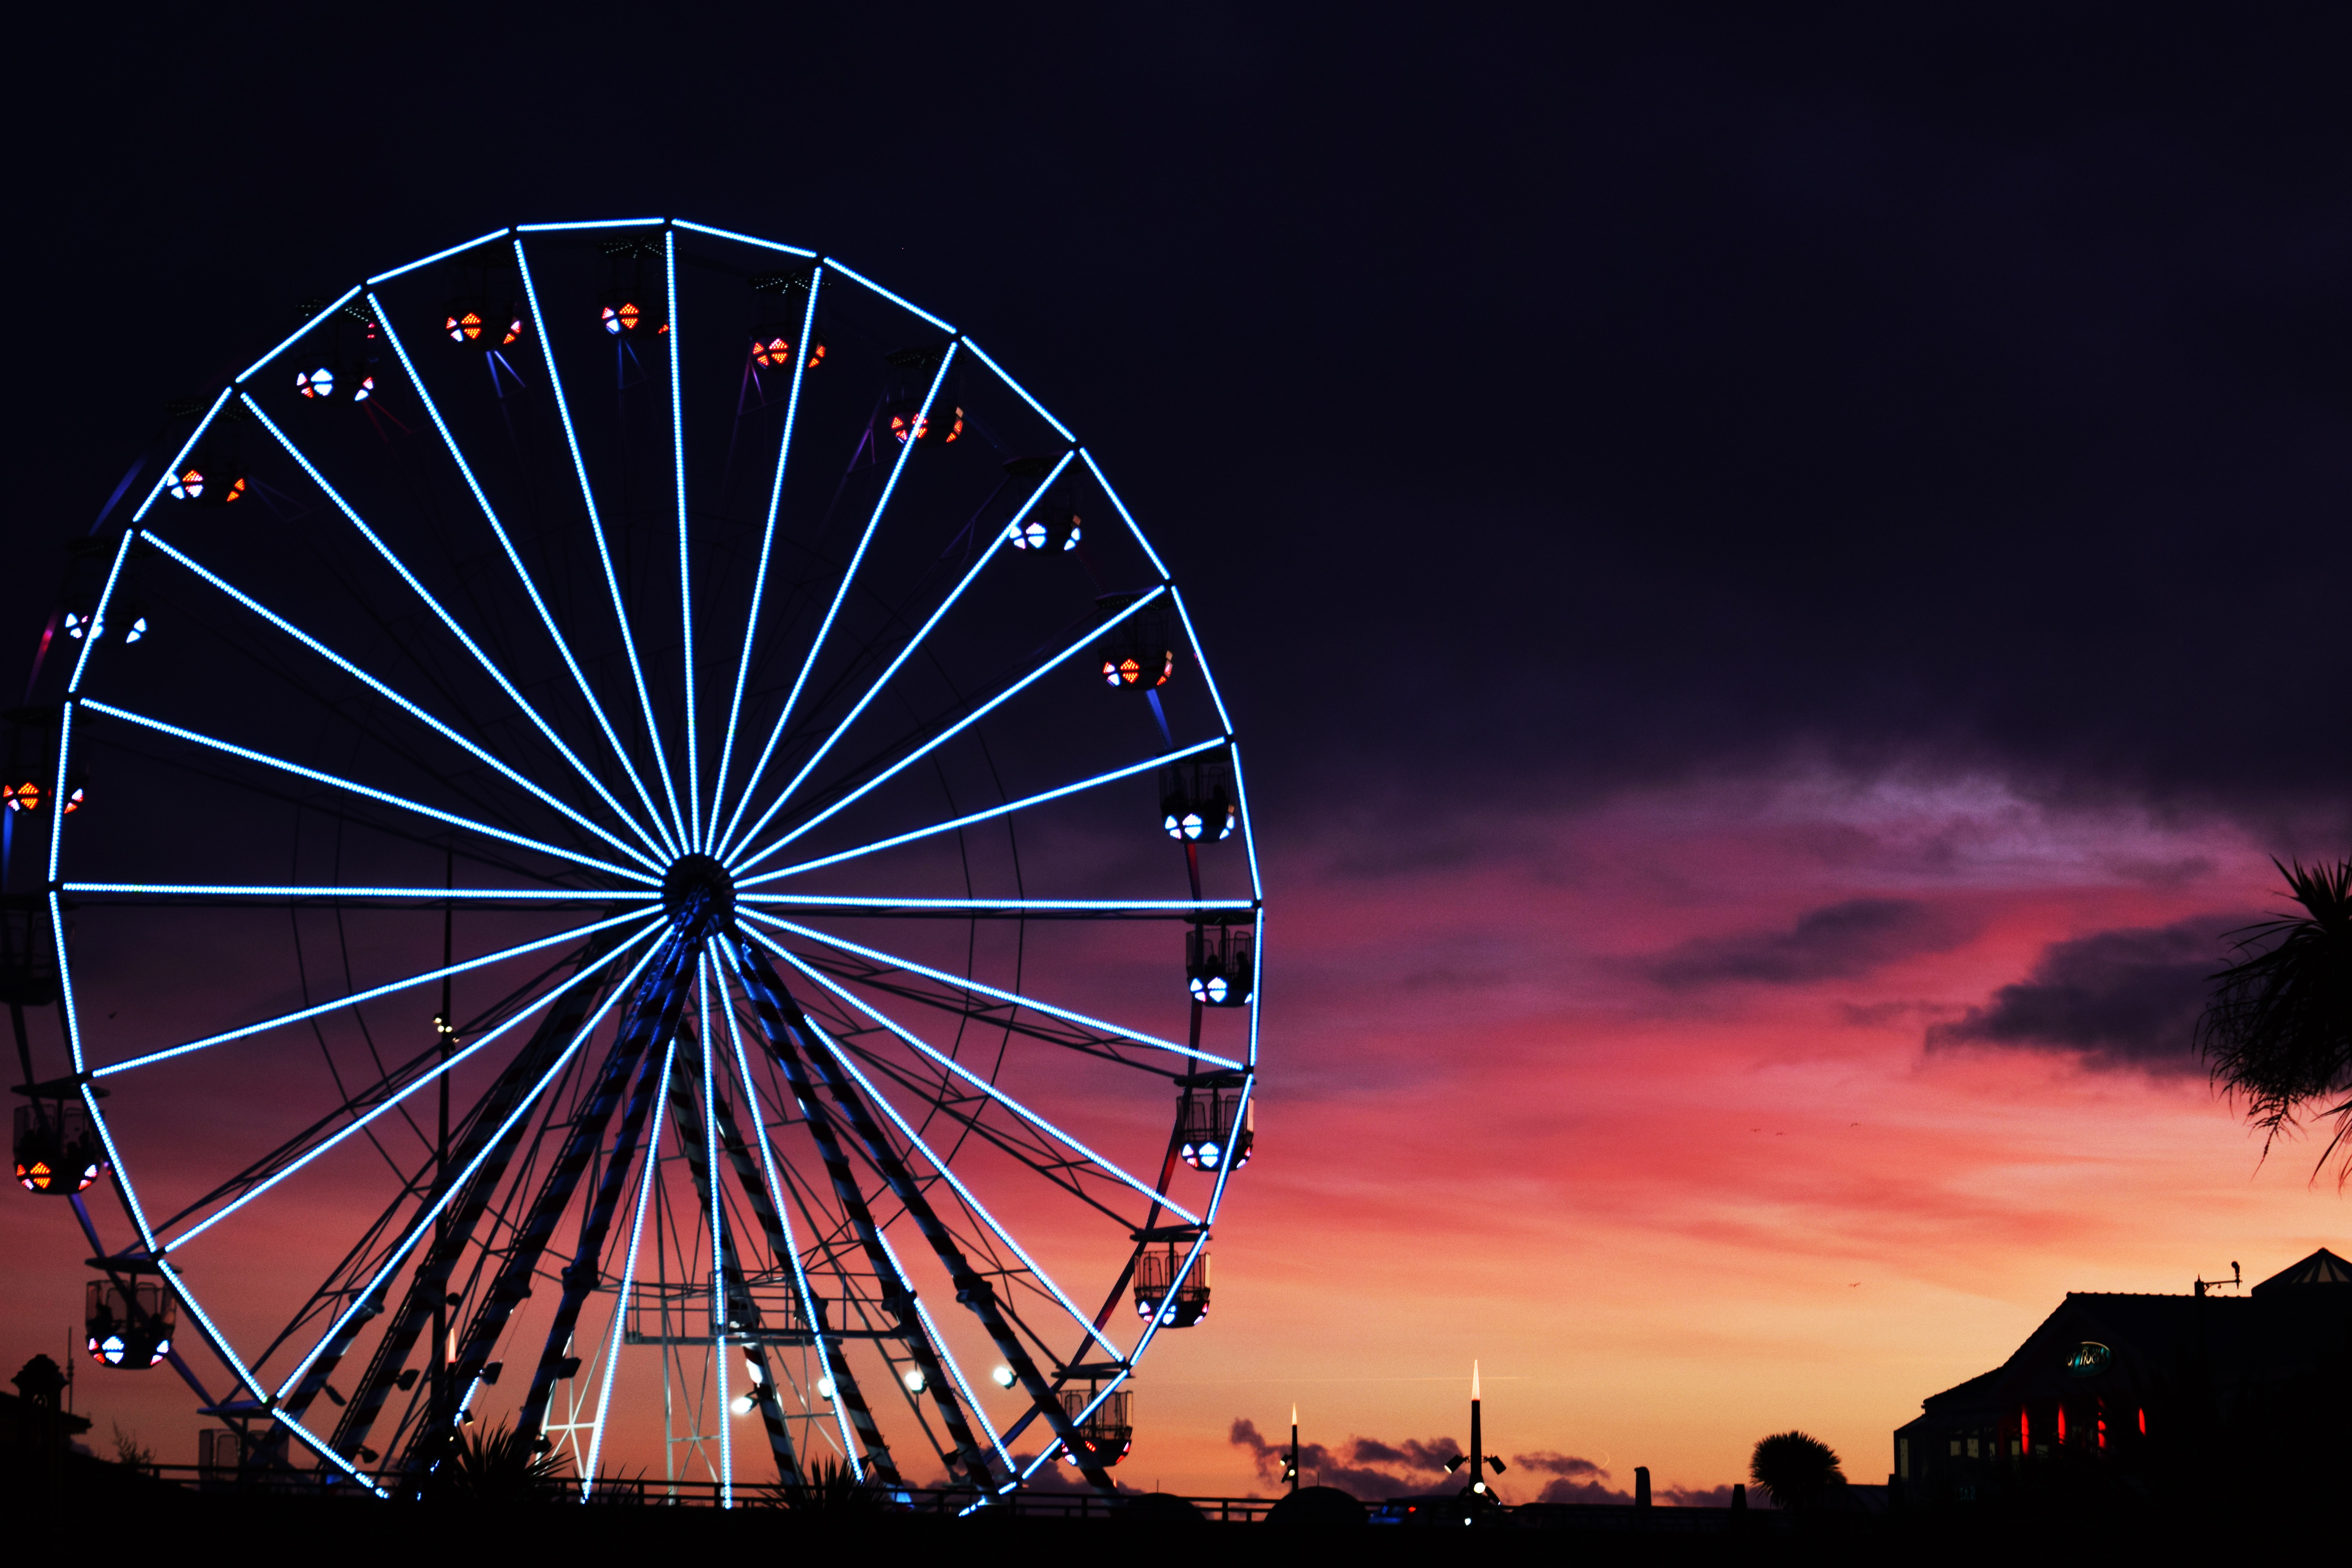 A Ferris wheel with blue lights in front of a pink and orange sunset.